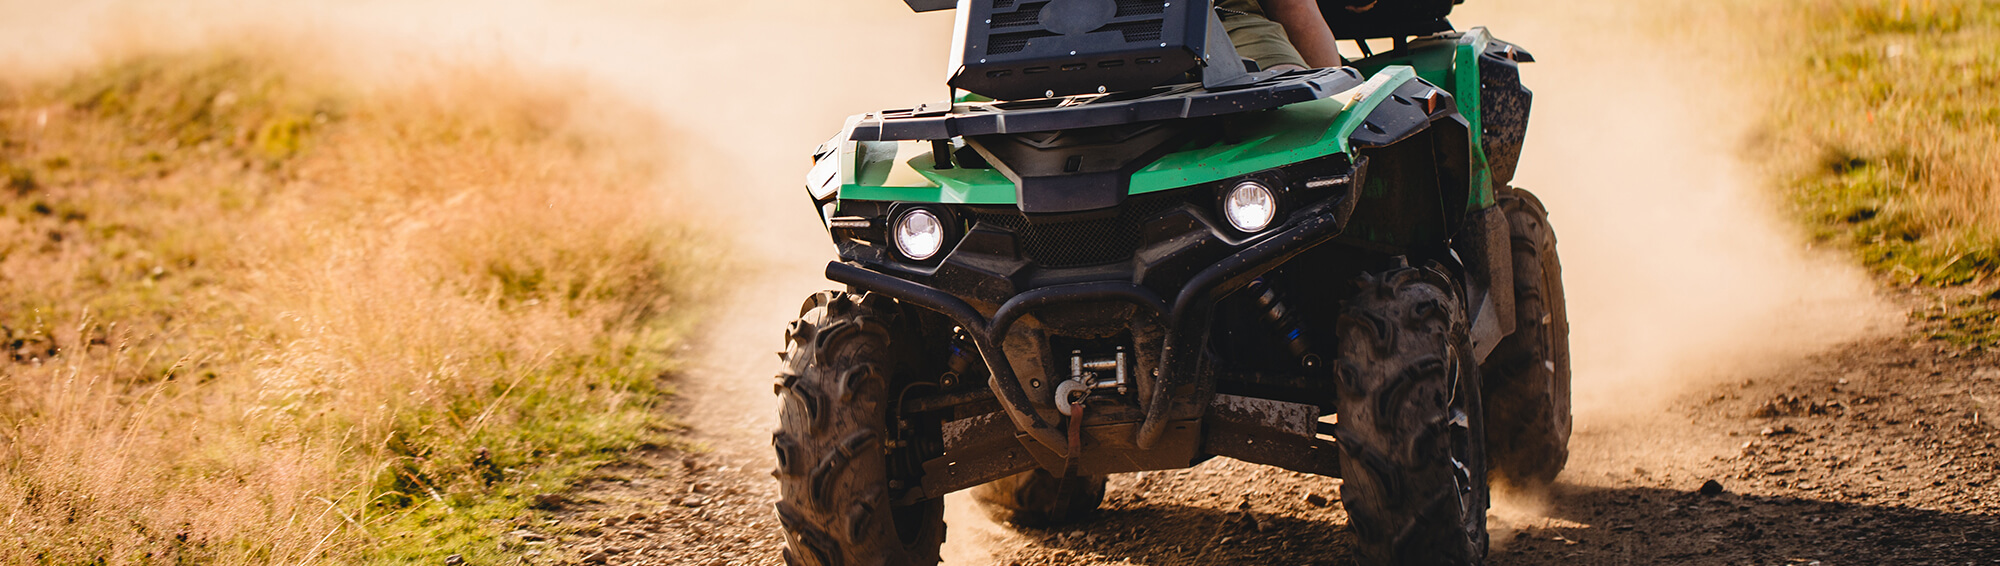 Who Can Be Held Liable for ATV Injuries?